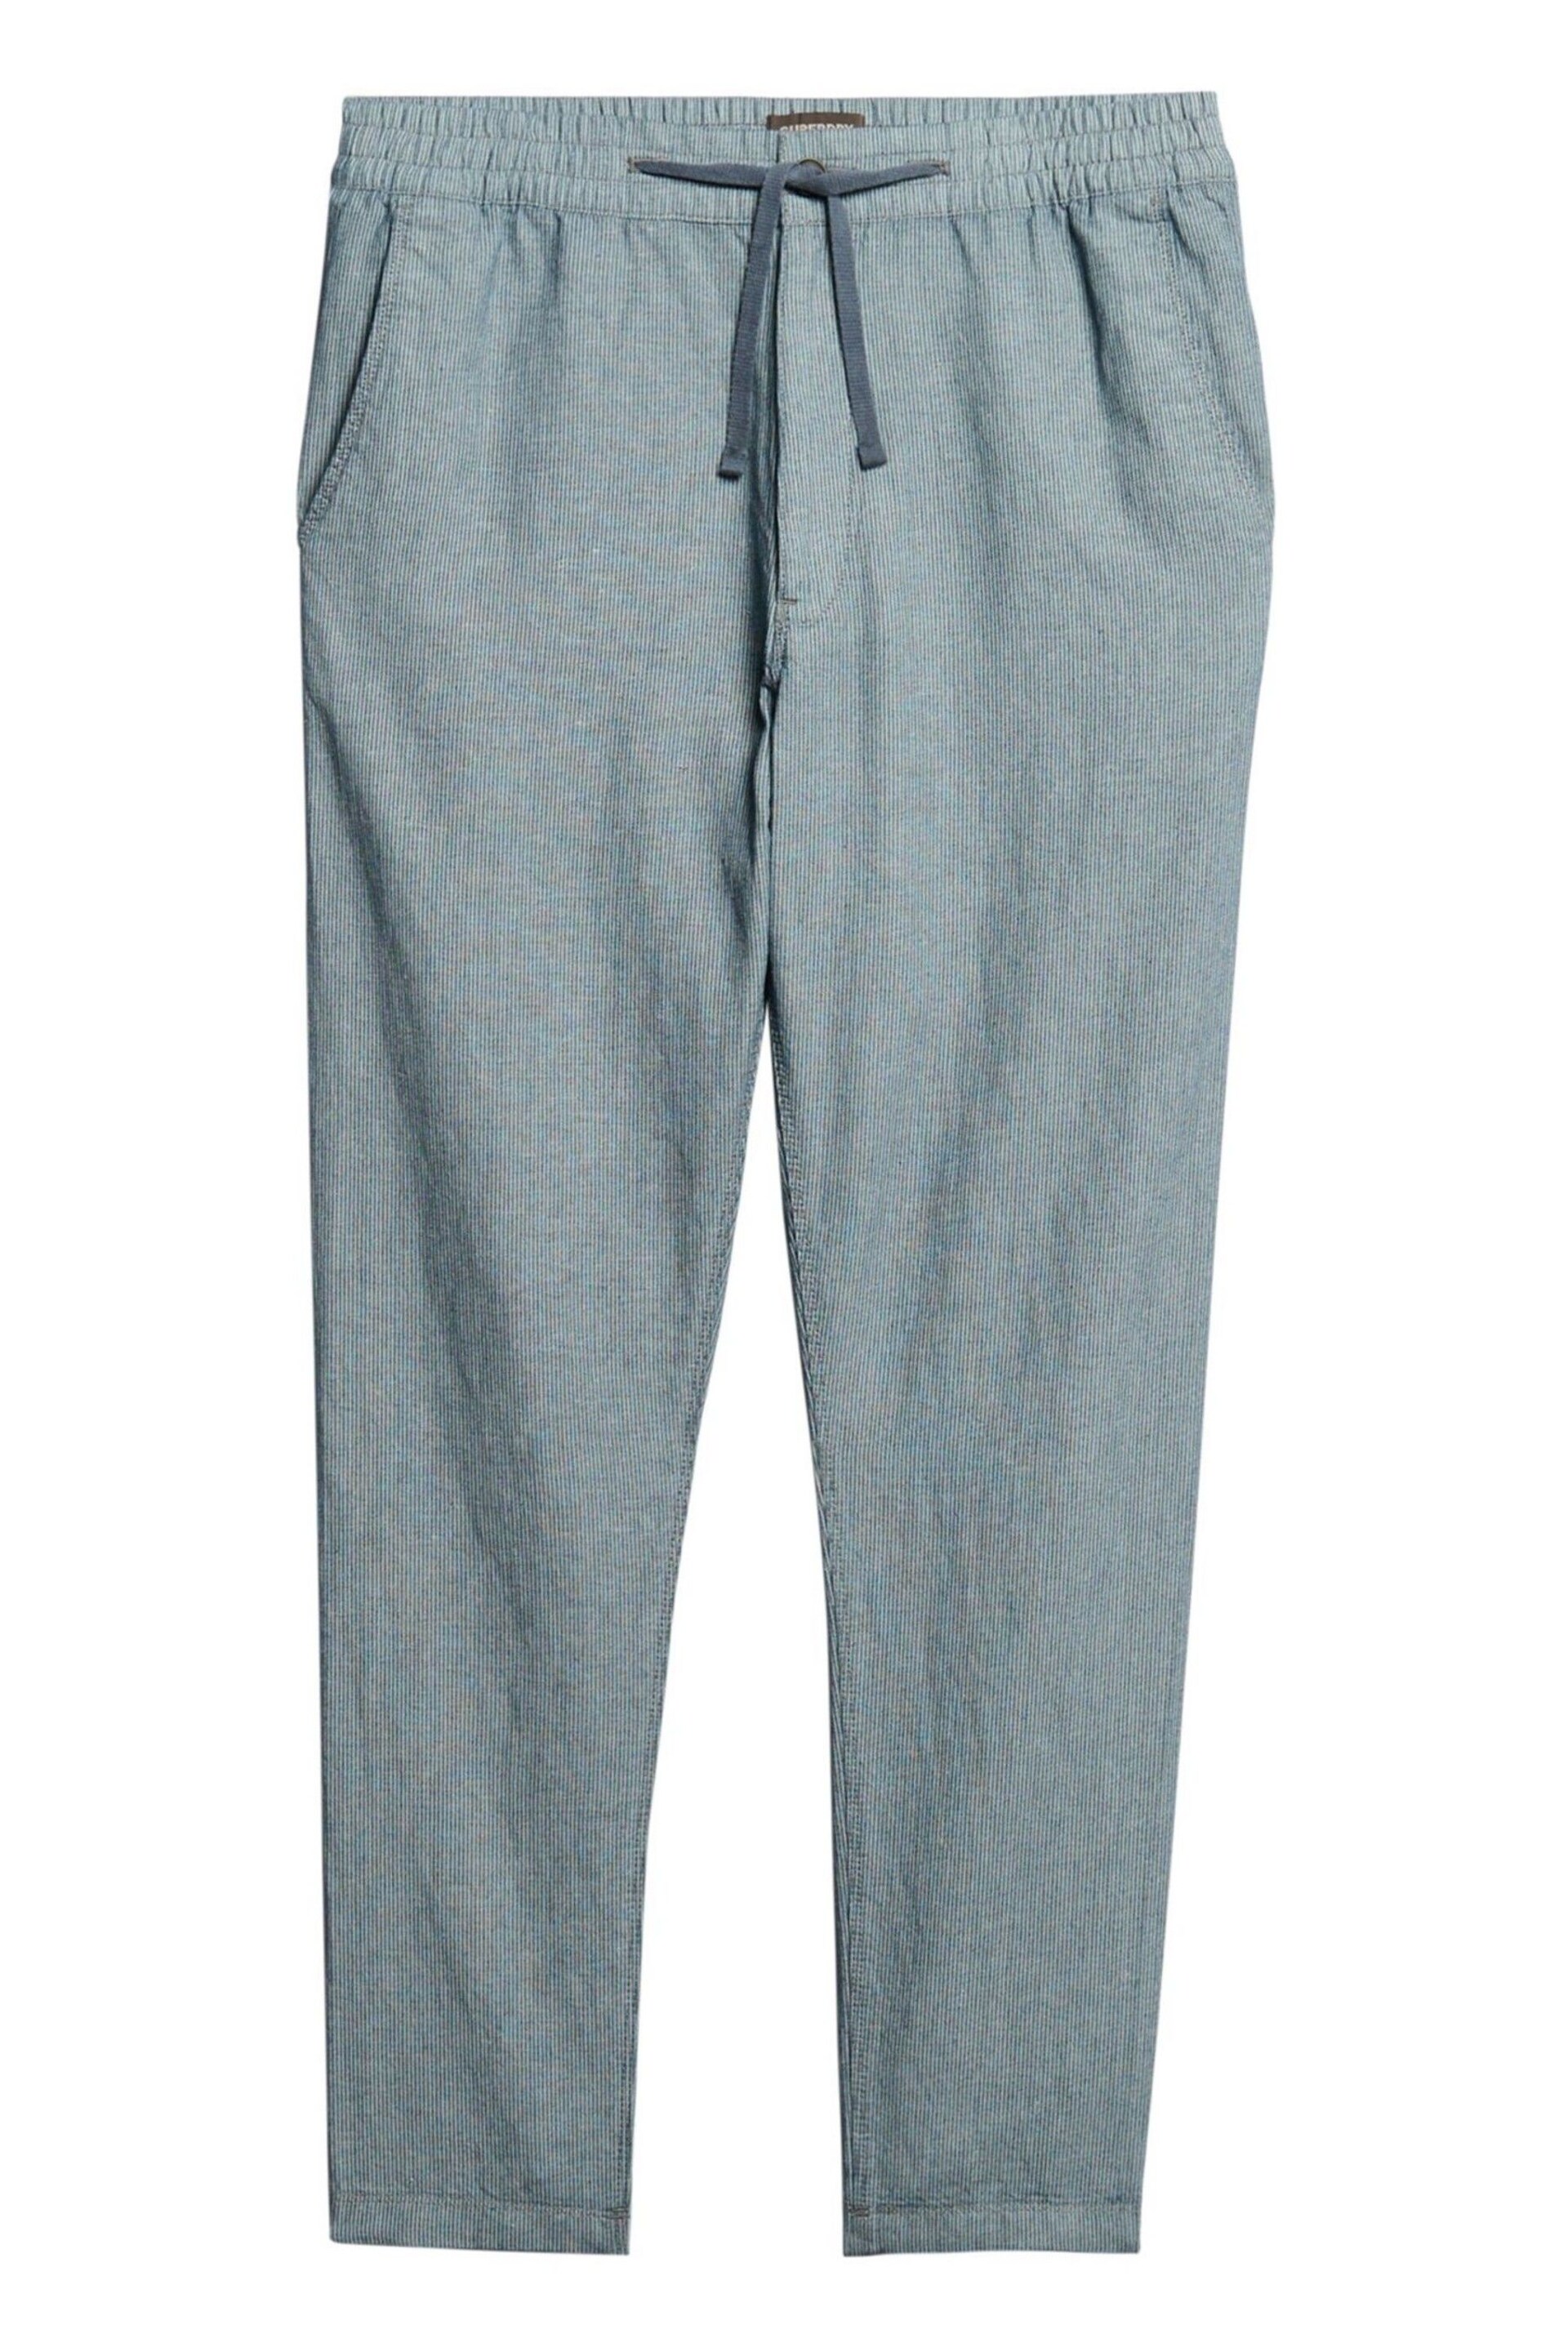 Superdry Grey Drawstring Linen Trousers - Image 5 of 5